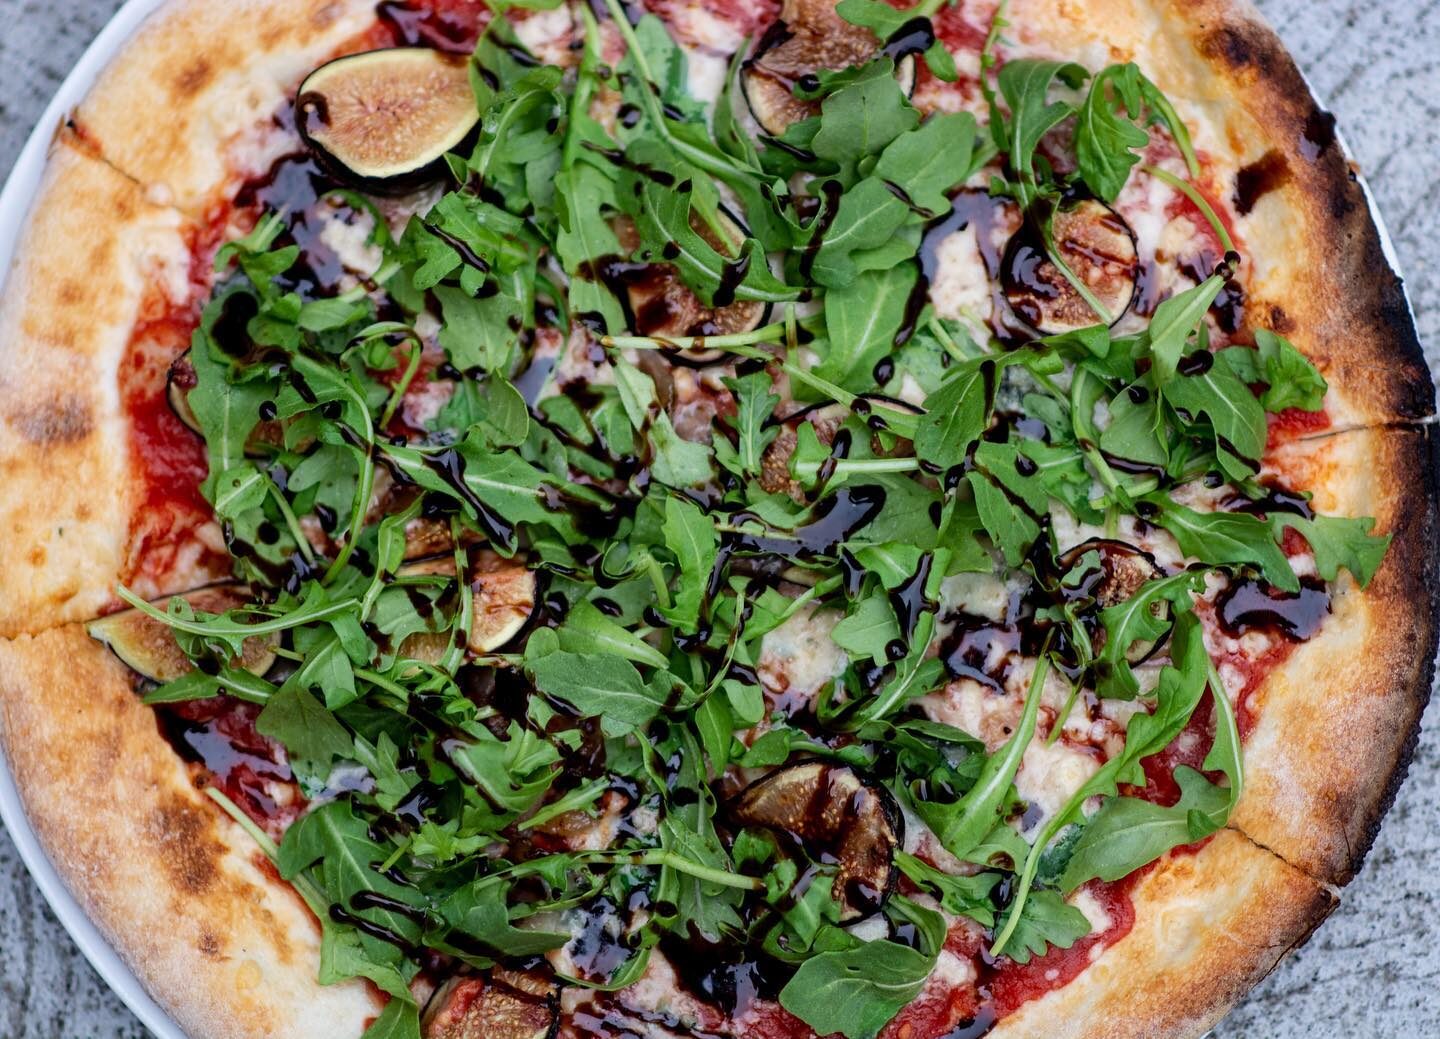 A fig and arugula pizza from Rodi Italian along the Lewis and Clark Historic Trail